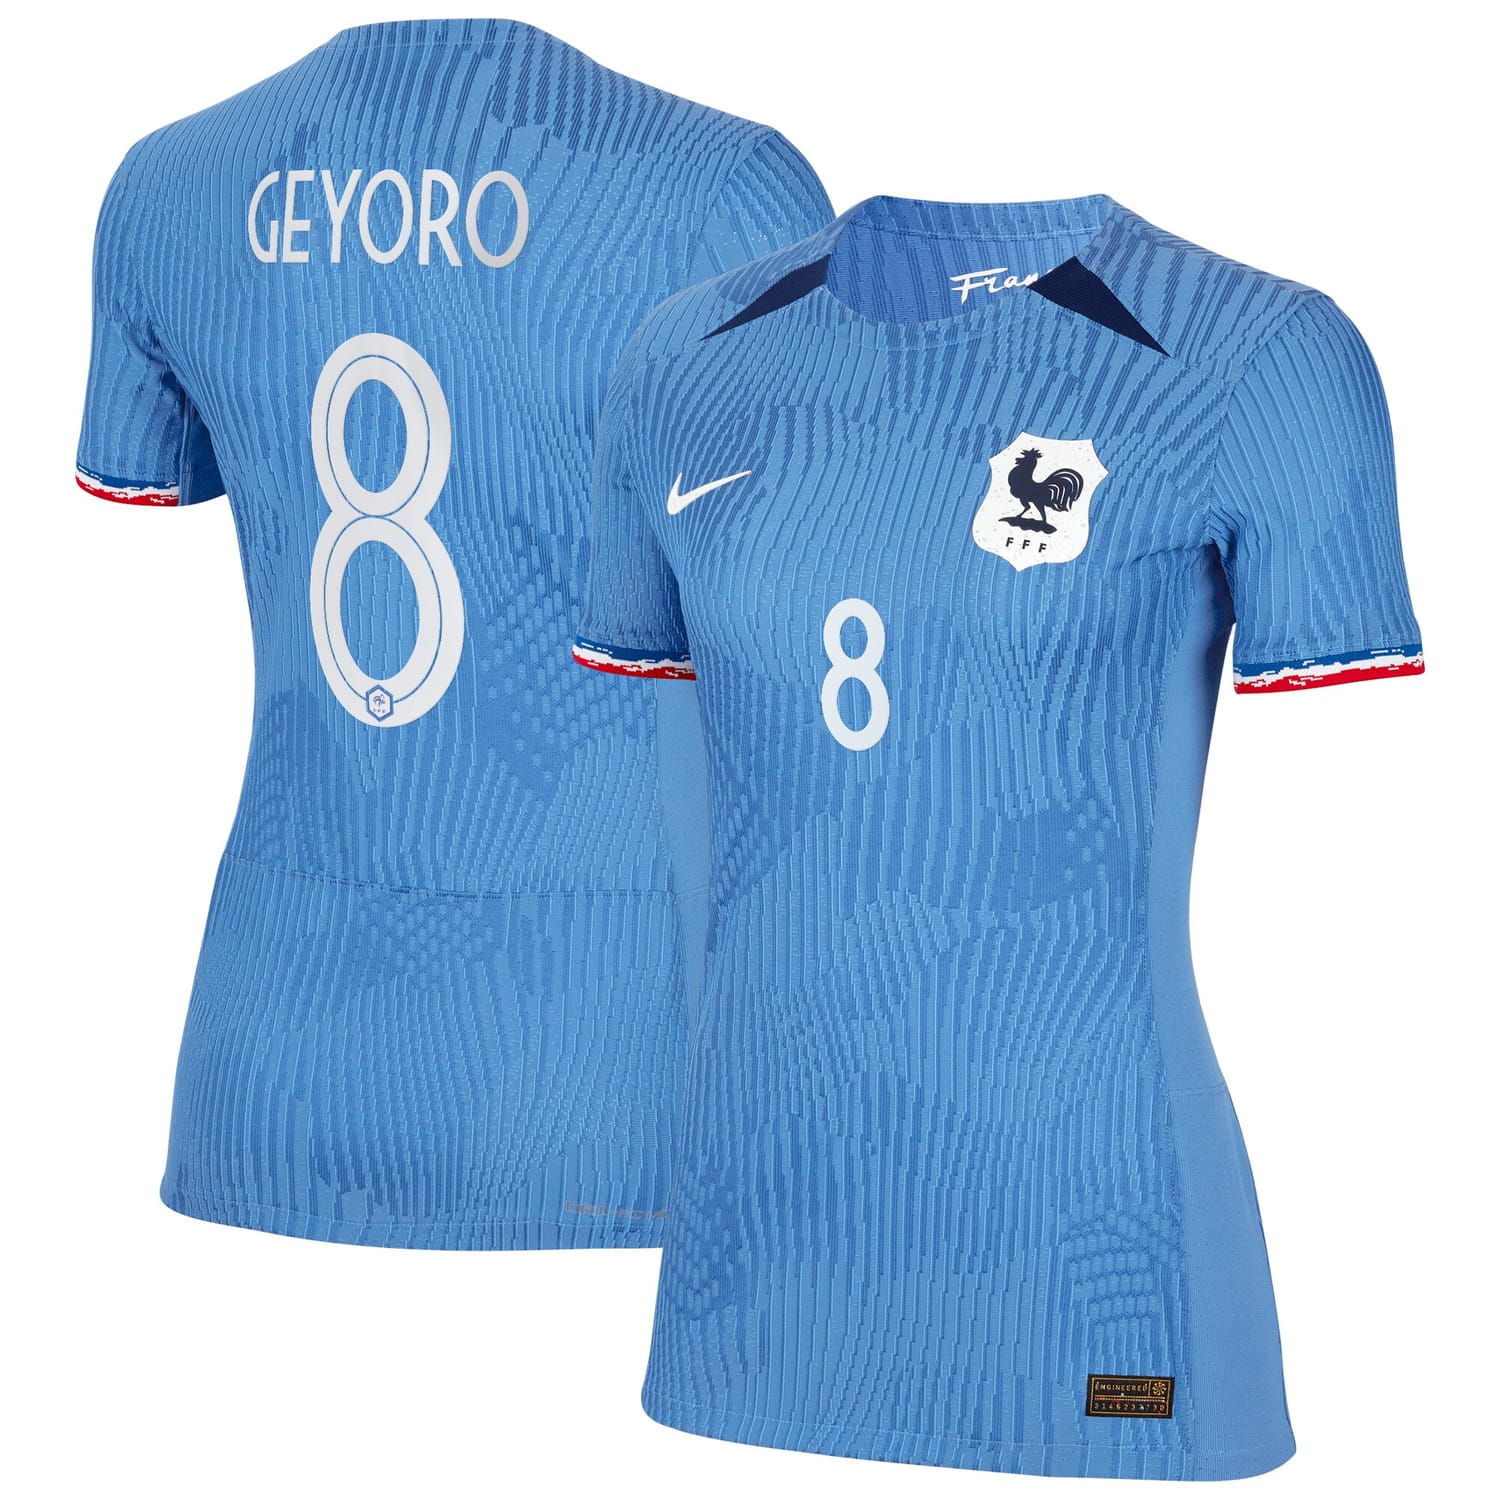 France National Team Home Authentic Jersey Shirt 2023-24 player Grace Geyoro 8 printing for Women